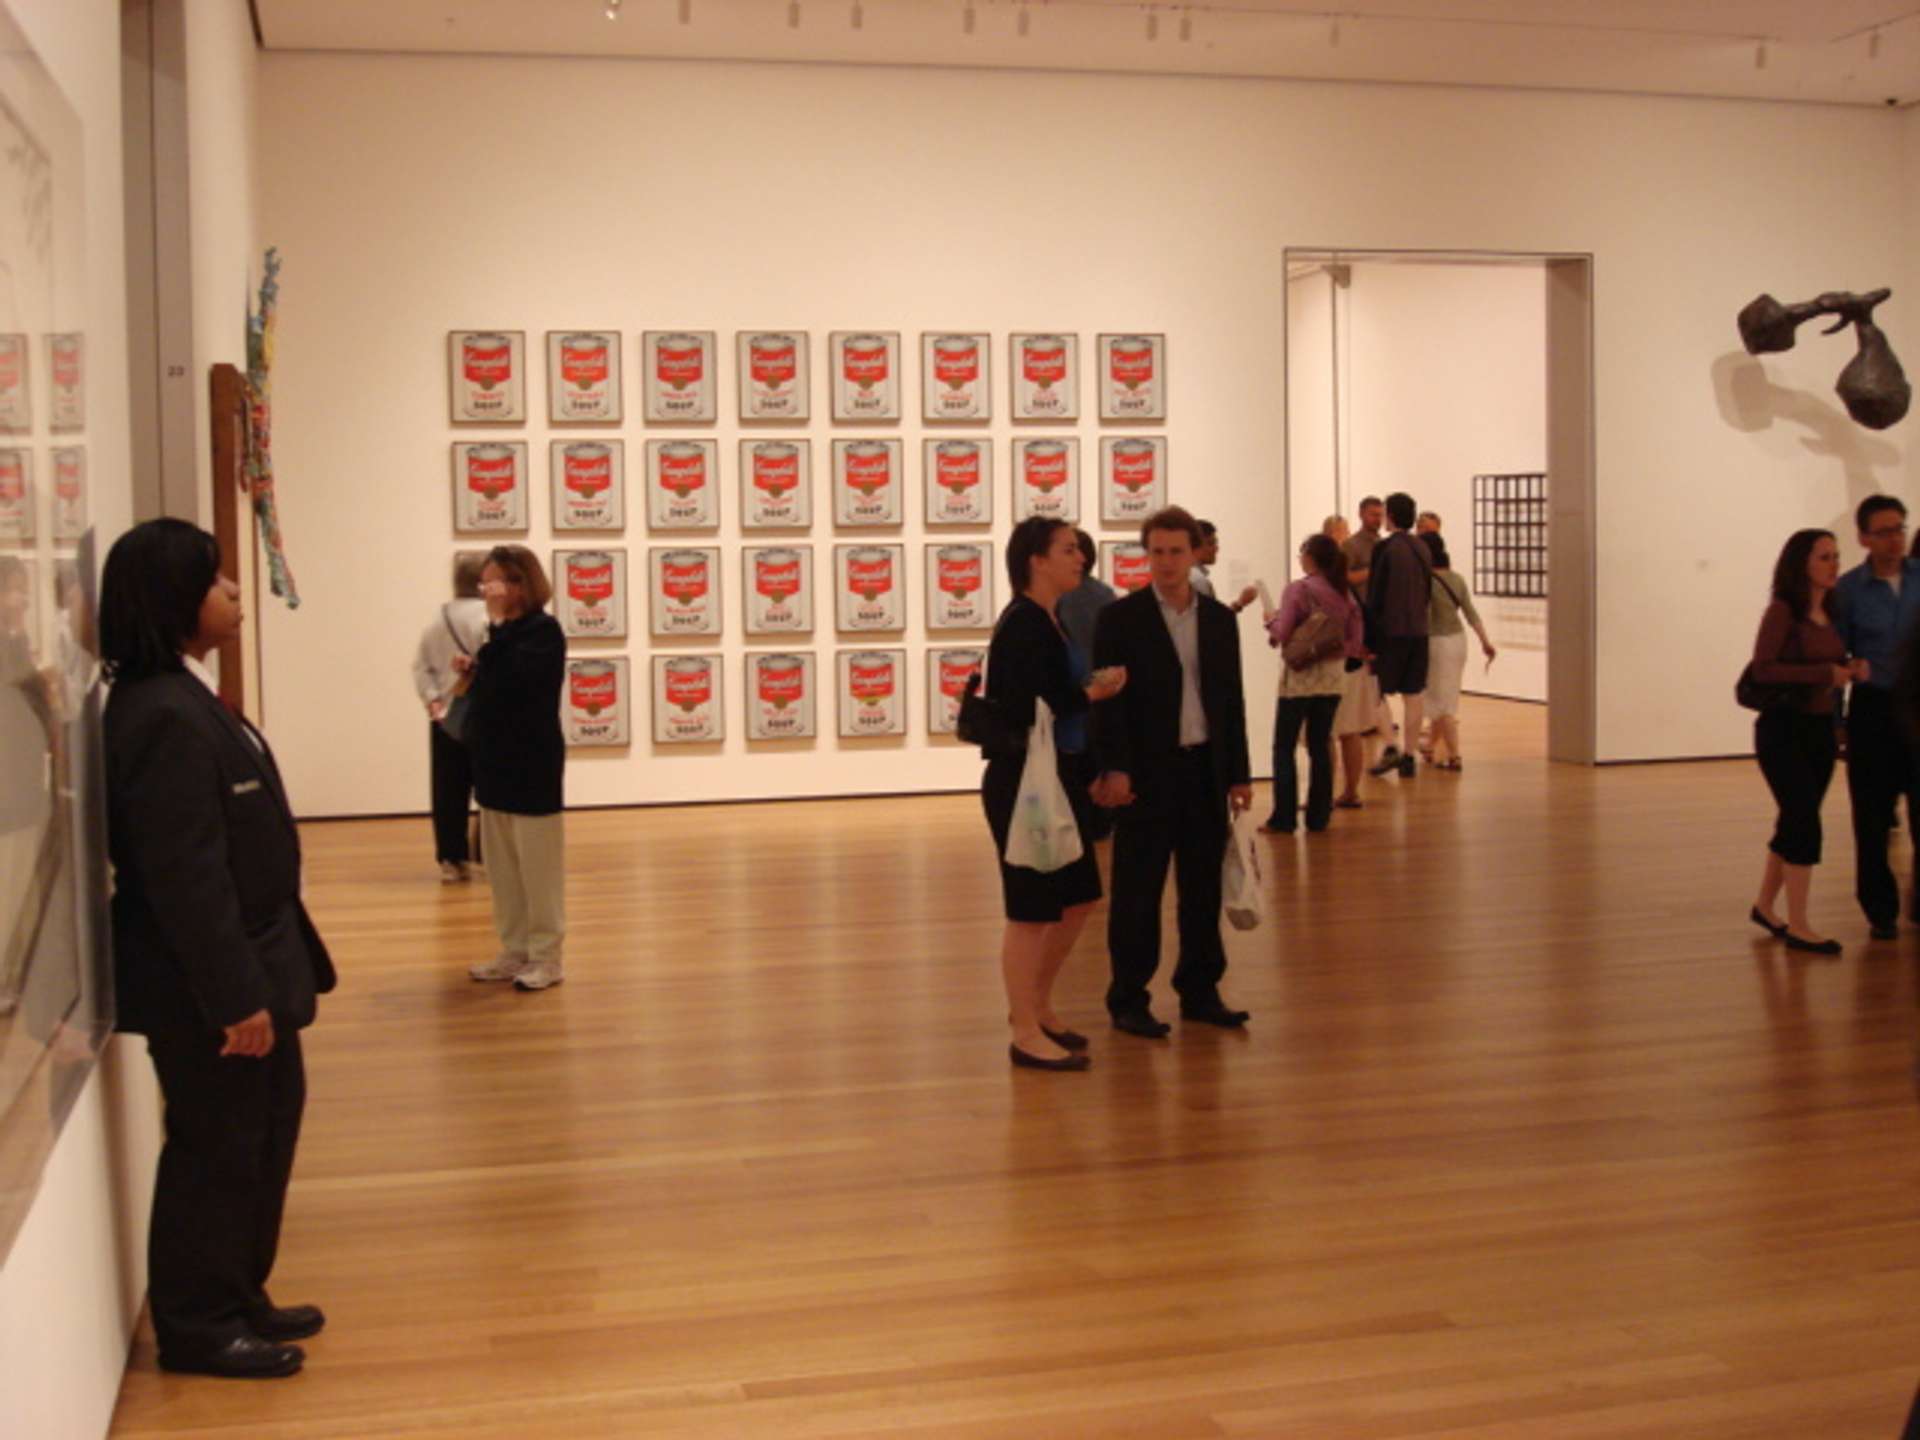 Andy Warhol Campbell's Soup Cans on display at the MoMA, New York- MyArtBroker